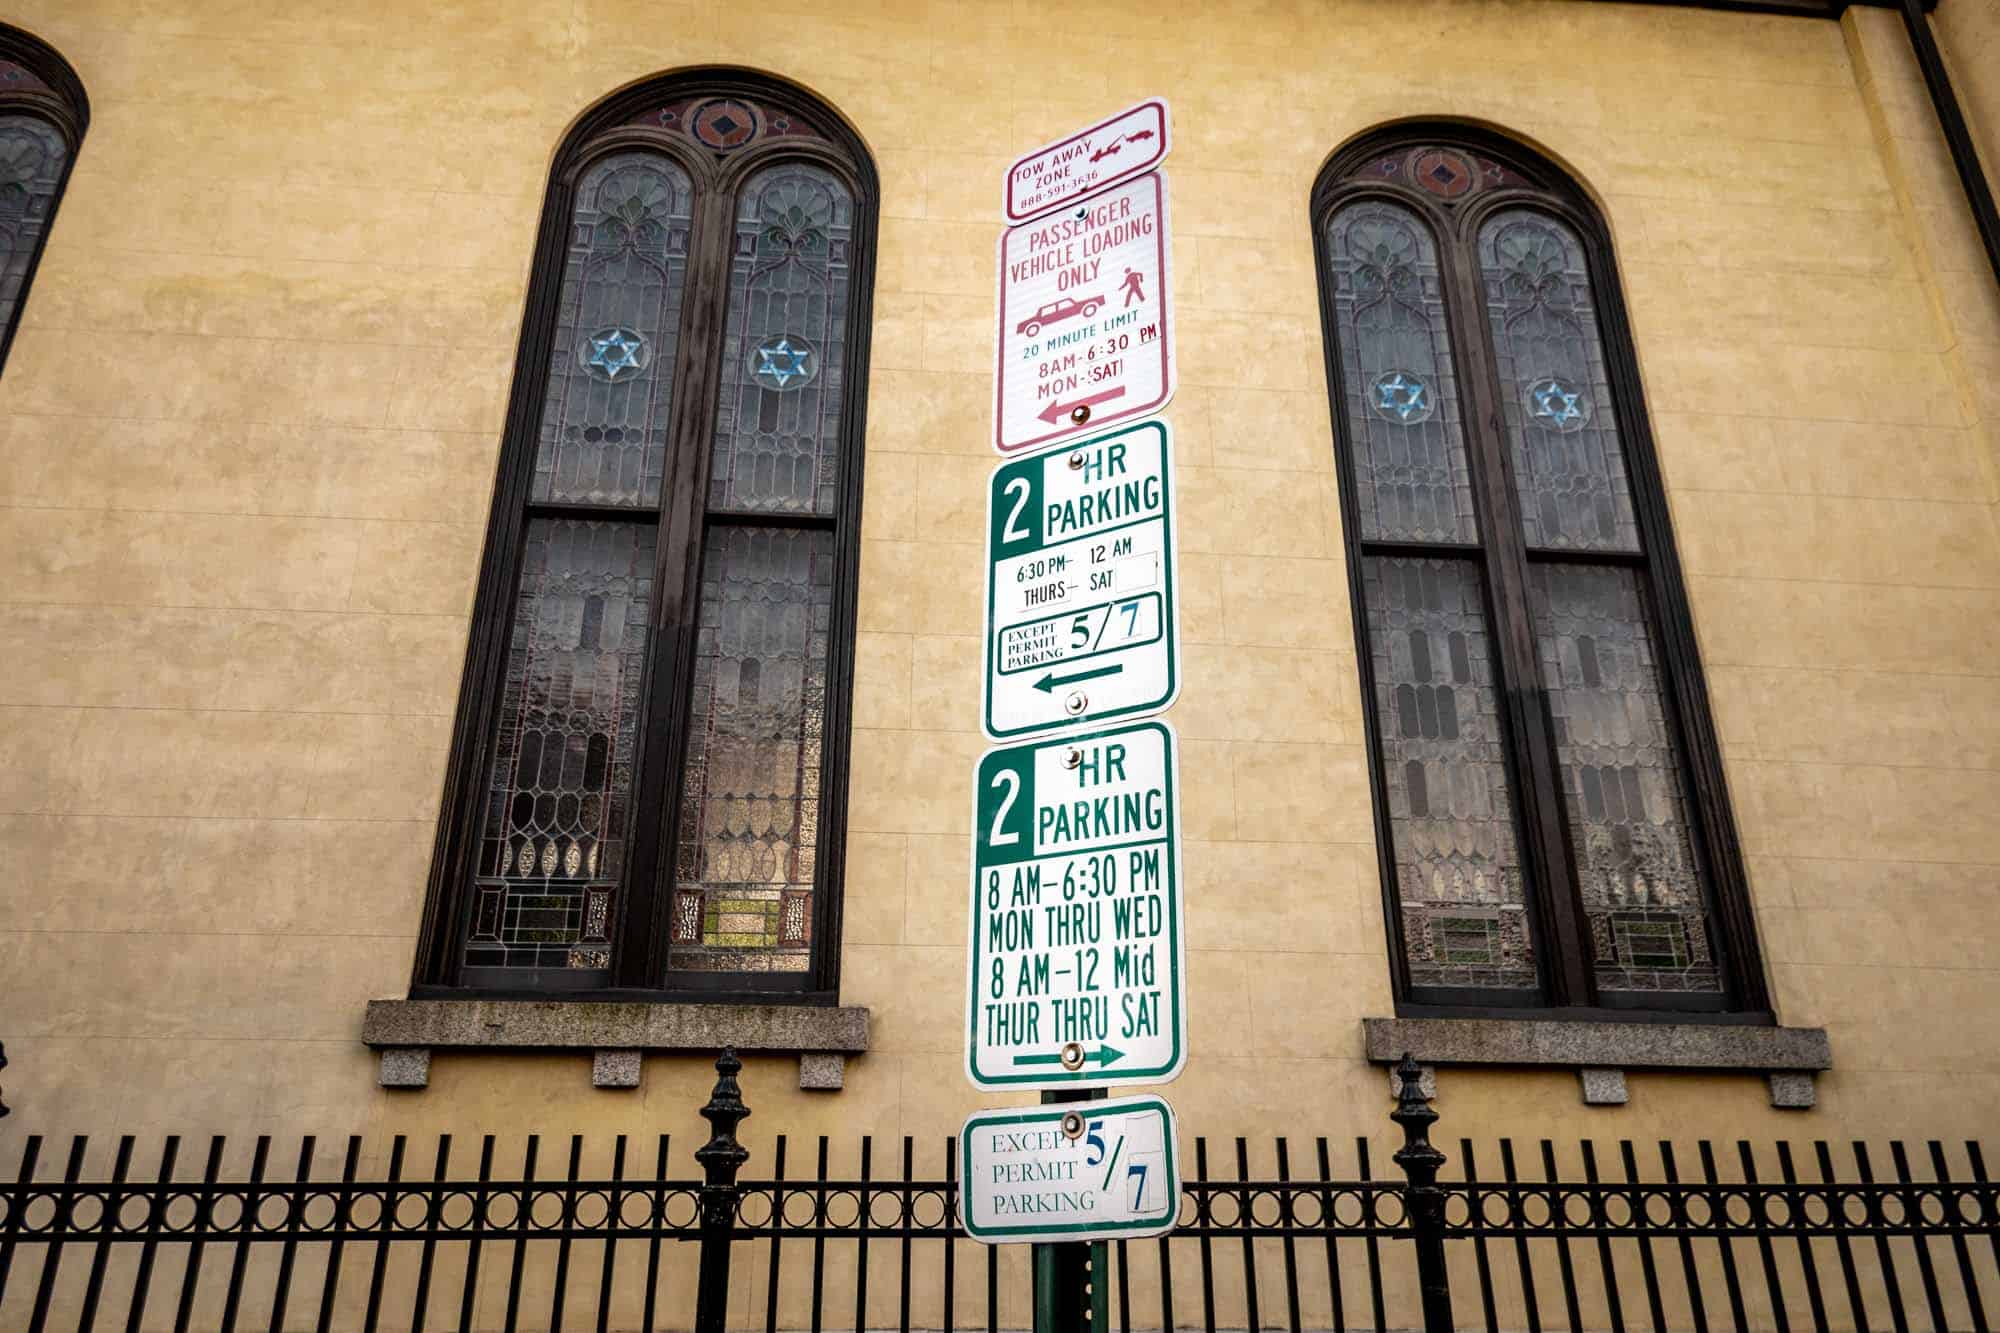 Confusing and contradictory parking signs in Philadelphia